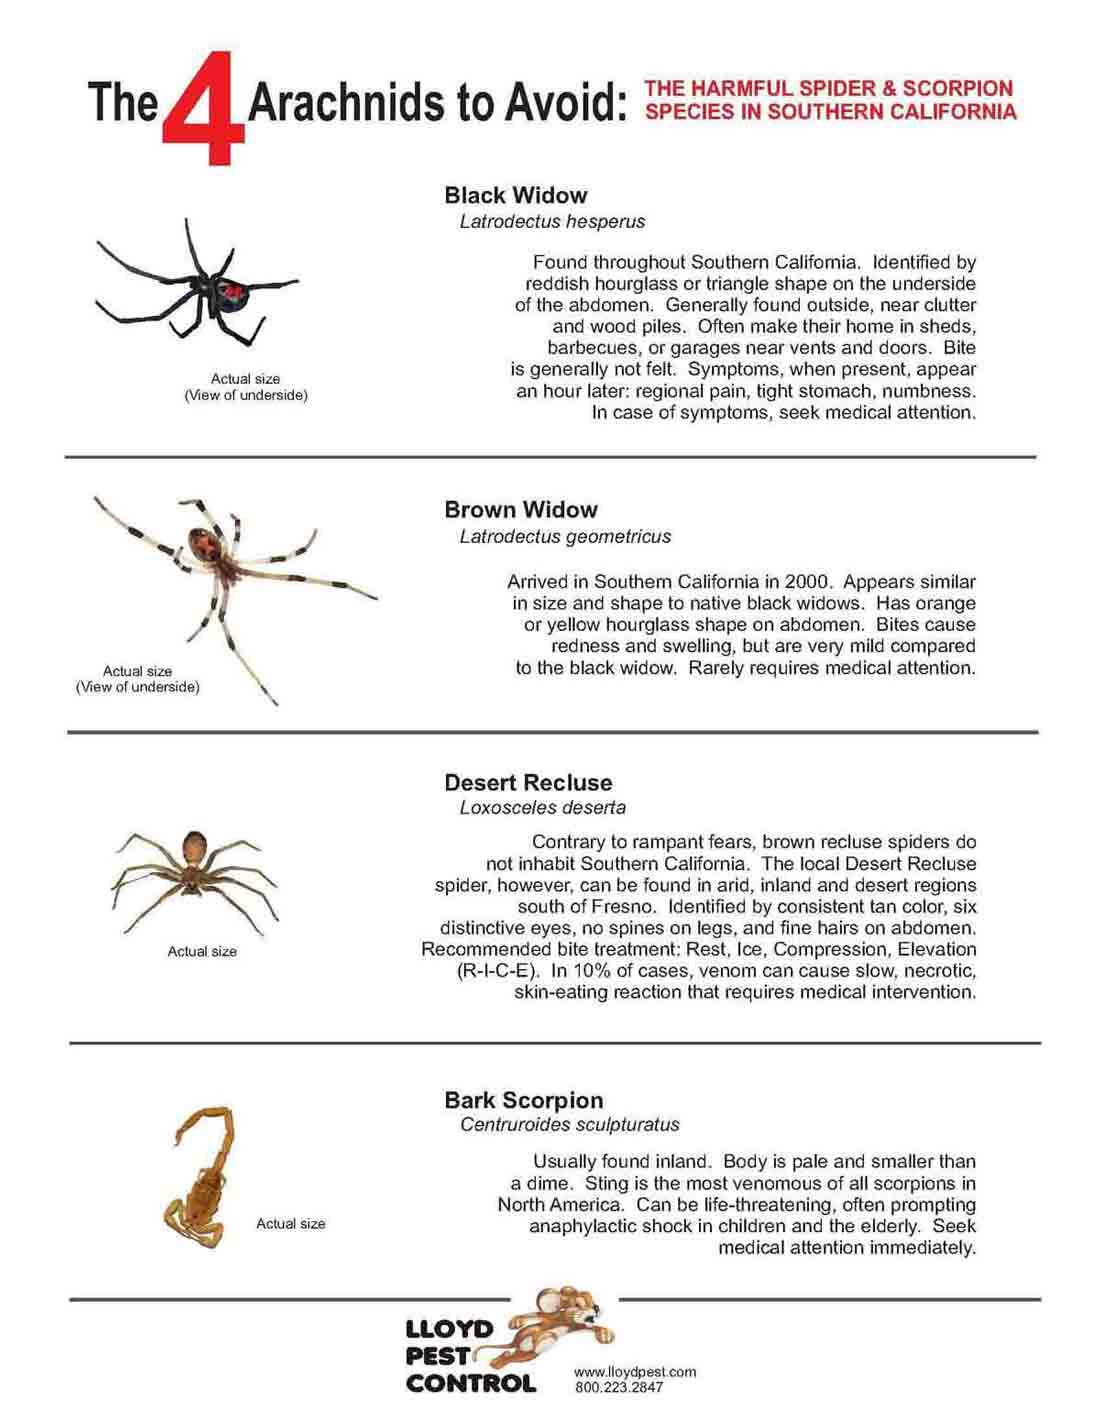 How To Identify And Avoid Dangerous Spiders